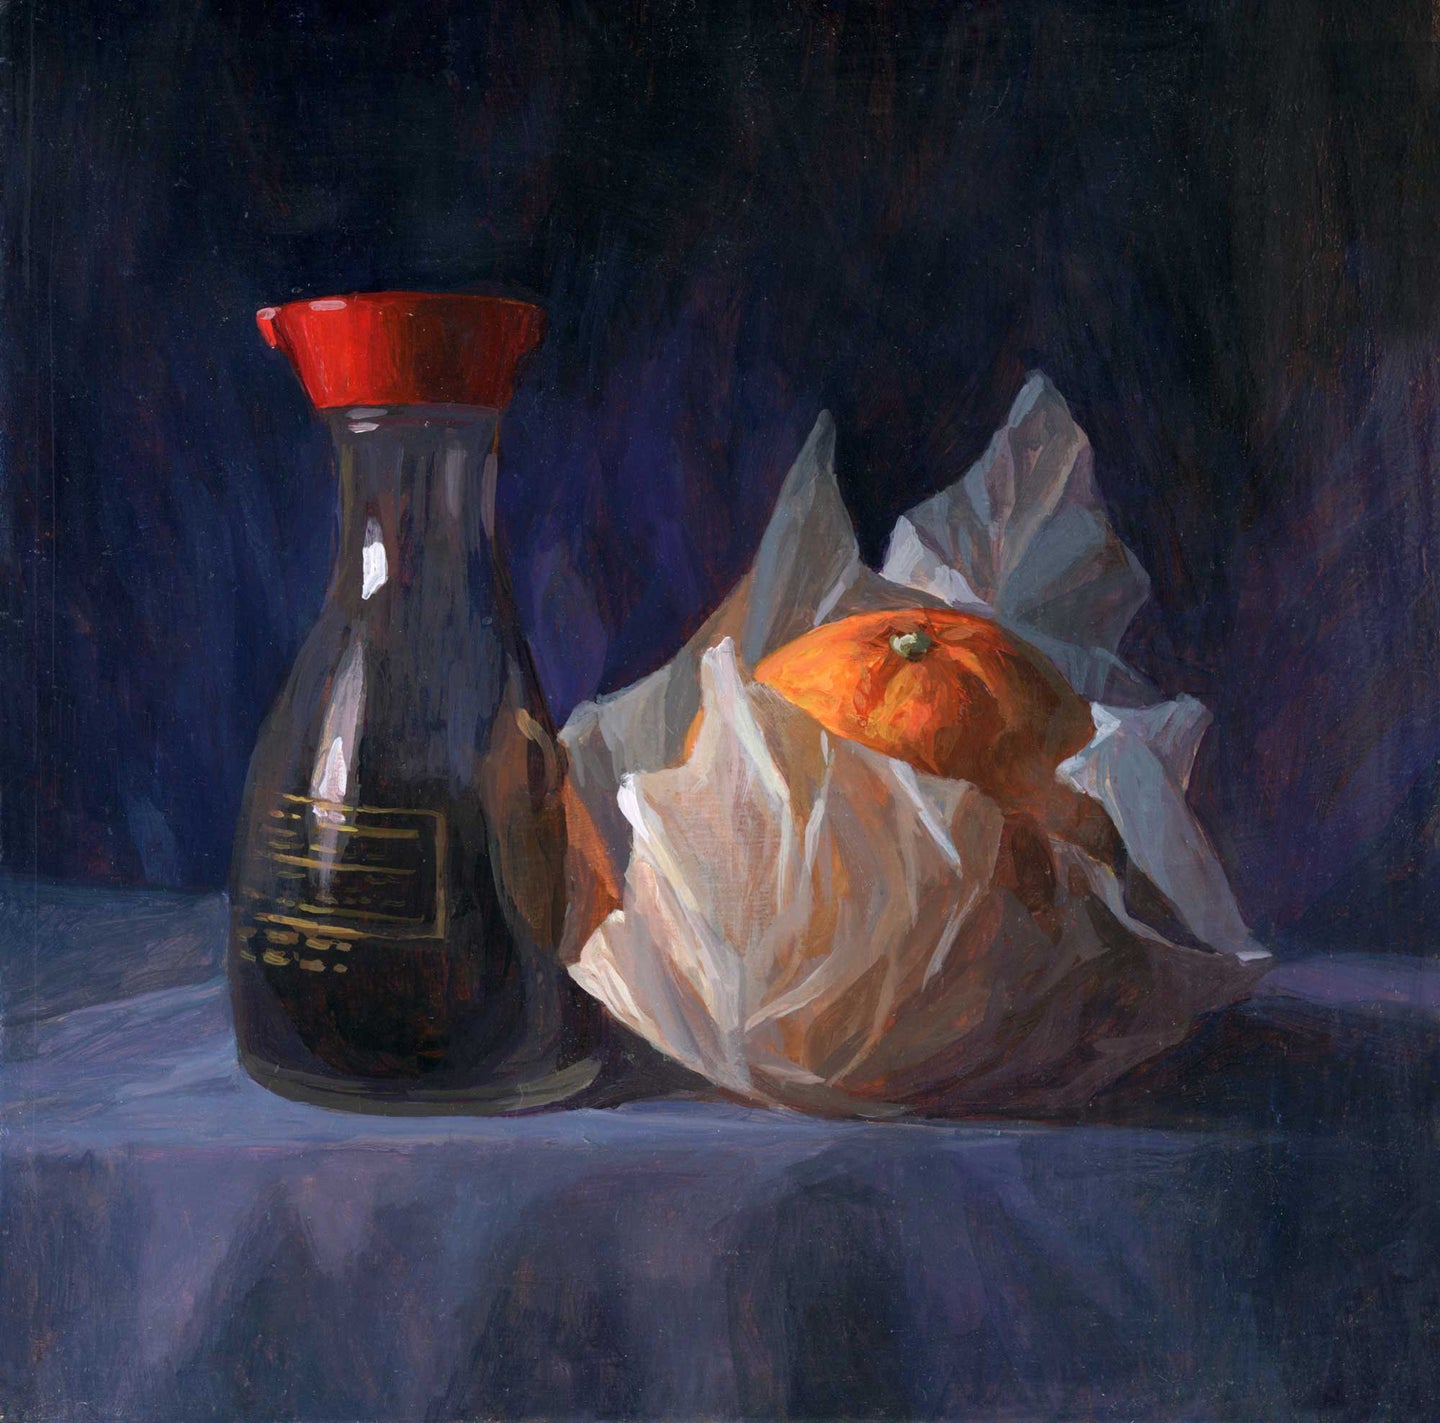 53. Soy Sauce Bottle and Orange in Wax Paper